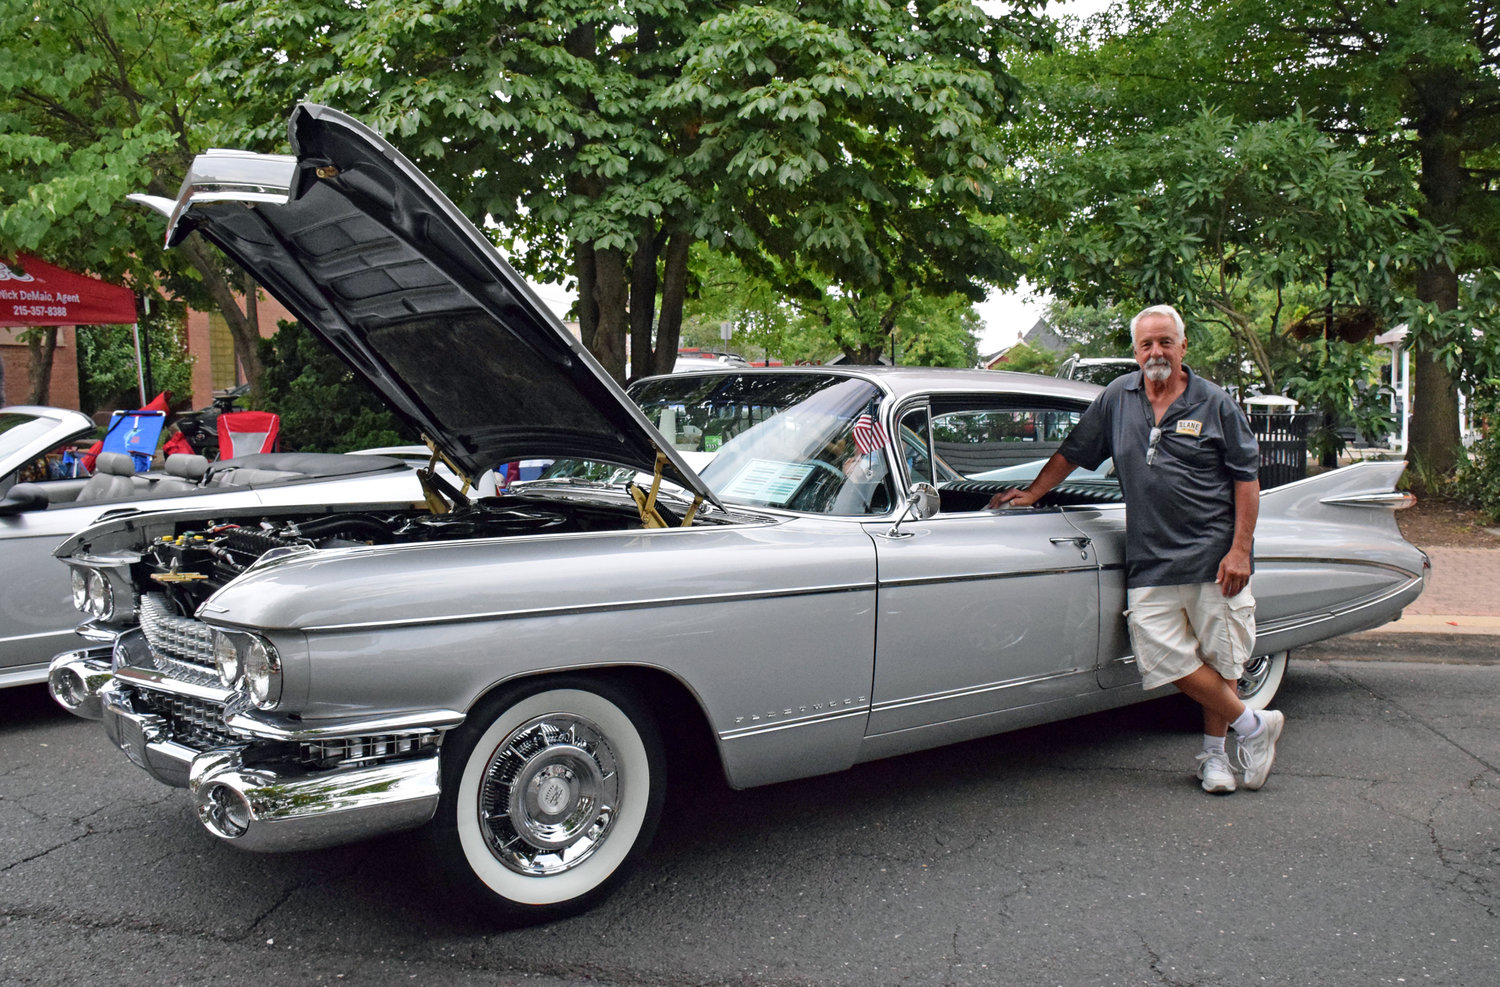 Car show takes over downtown Doylestown The Bucks County Herald